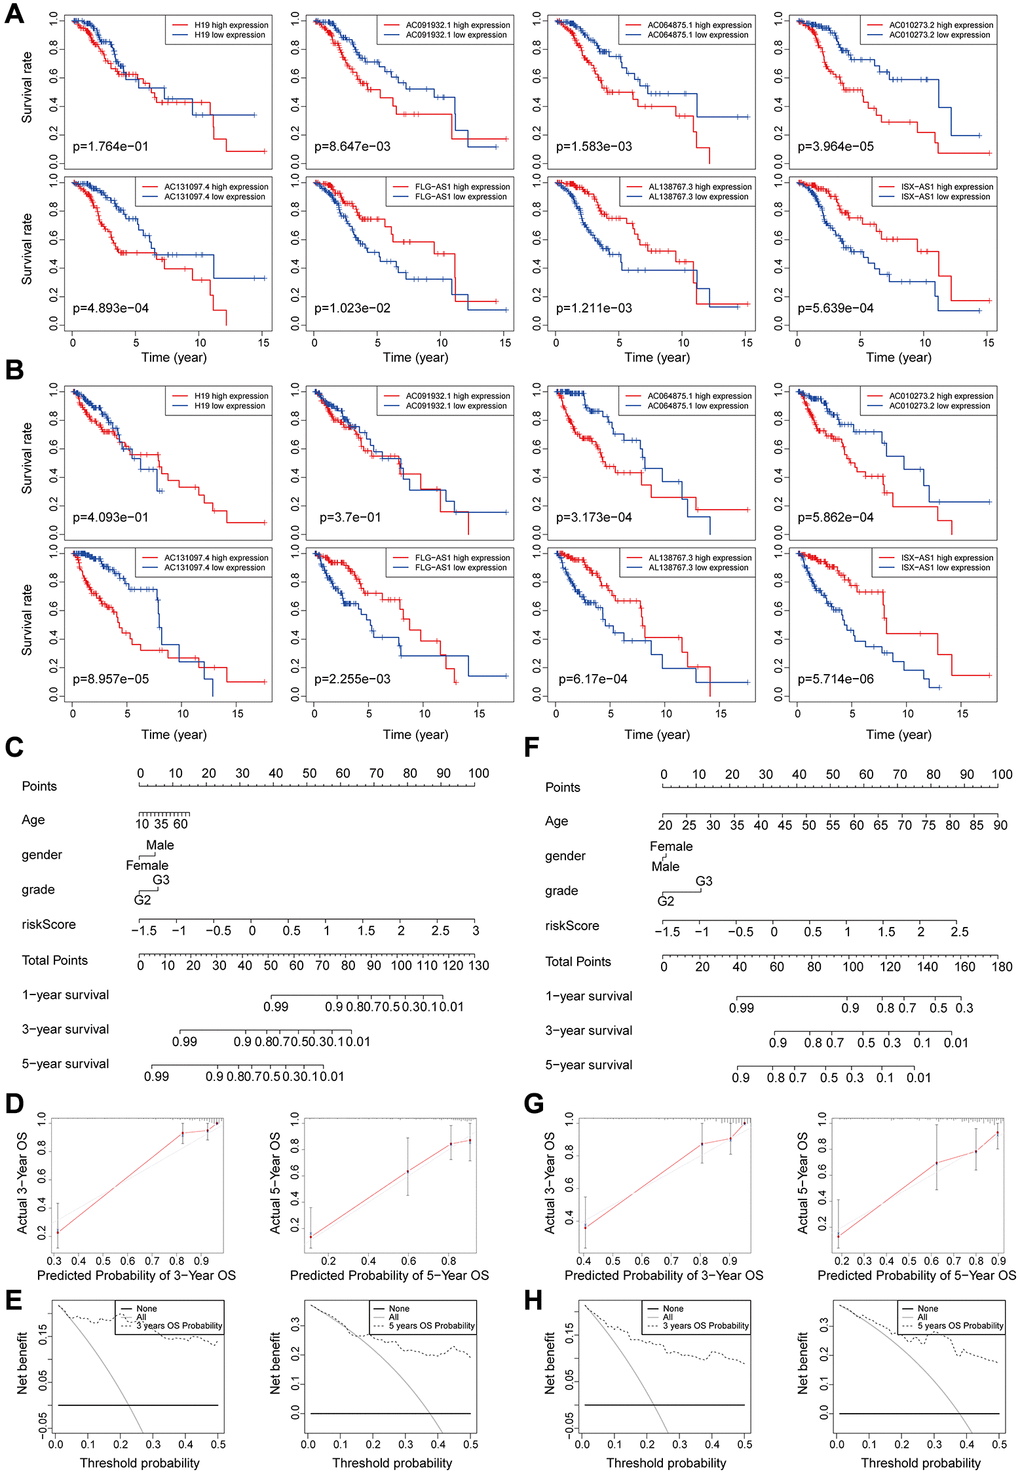 (A–B) Kaplan-Meier survival curves analysis for the eight genomic instability-associated lncRNAs using the training set (A) and validation set (B) of patients with low-grade glioma. (C–E) Nomograms for the eight genomic instability-associated lncRNAs for each factor in the training set, predictions of patient survival at 1, 3, and 5 years. Nomograms were evaluated using calibration curves and DCA curves. (F–H) Plot nomogram plots in the validation set and evaluation of nomograms using calibration curves and DCA curves.